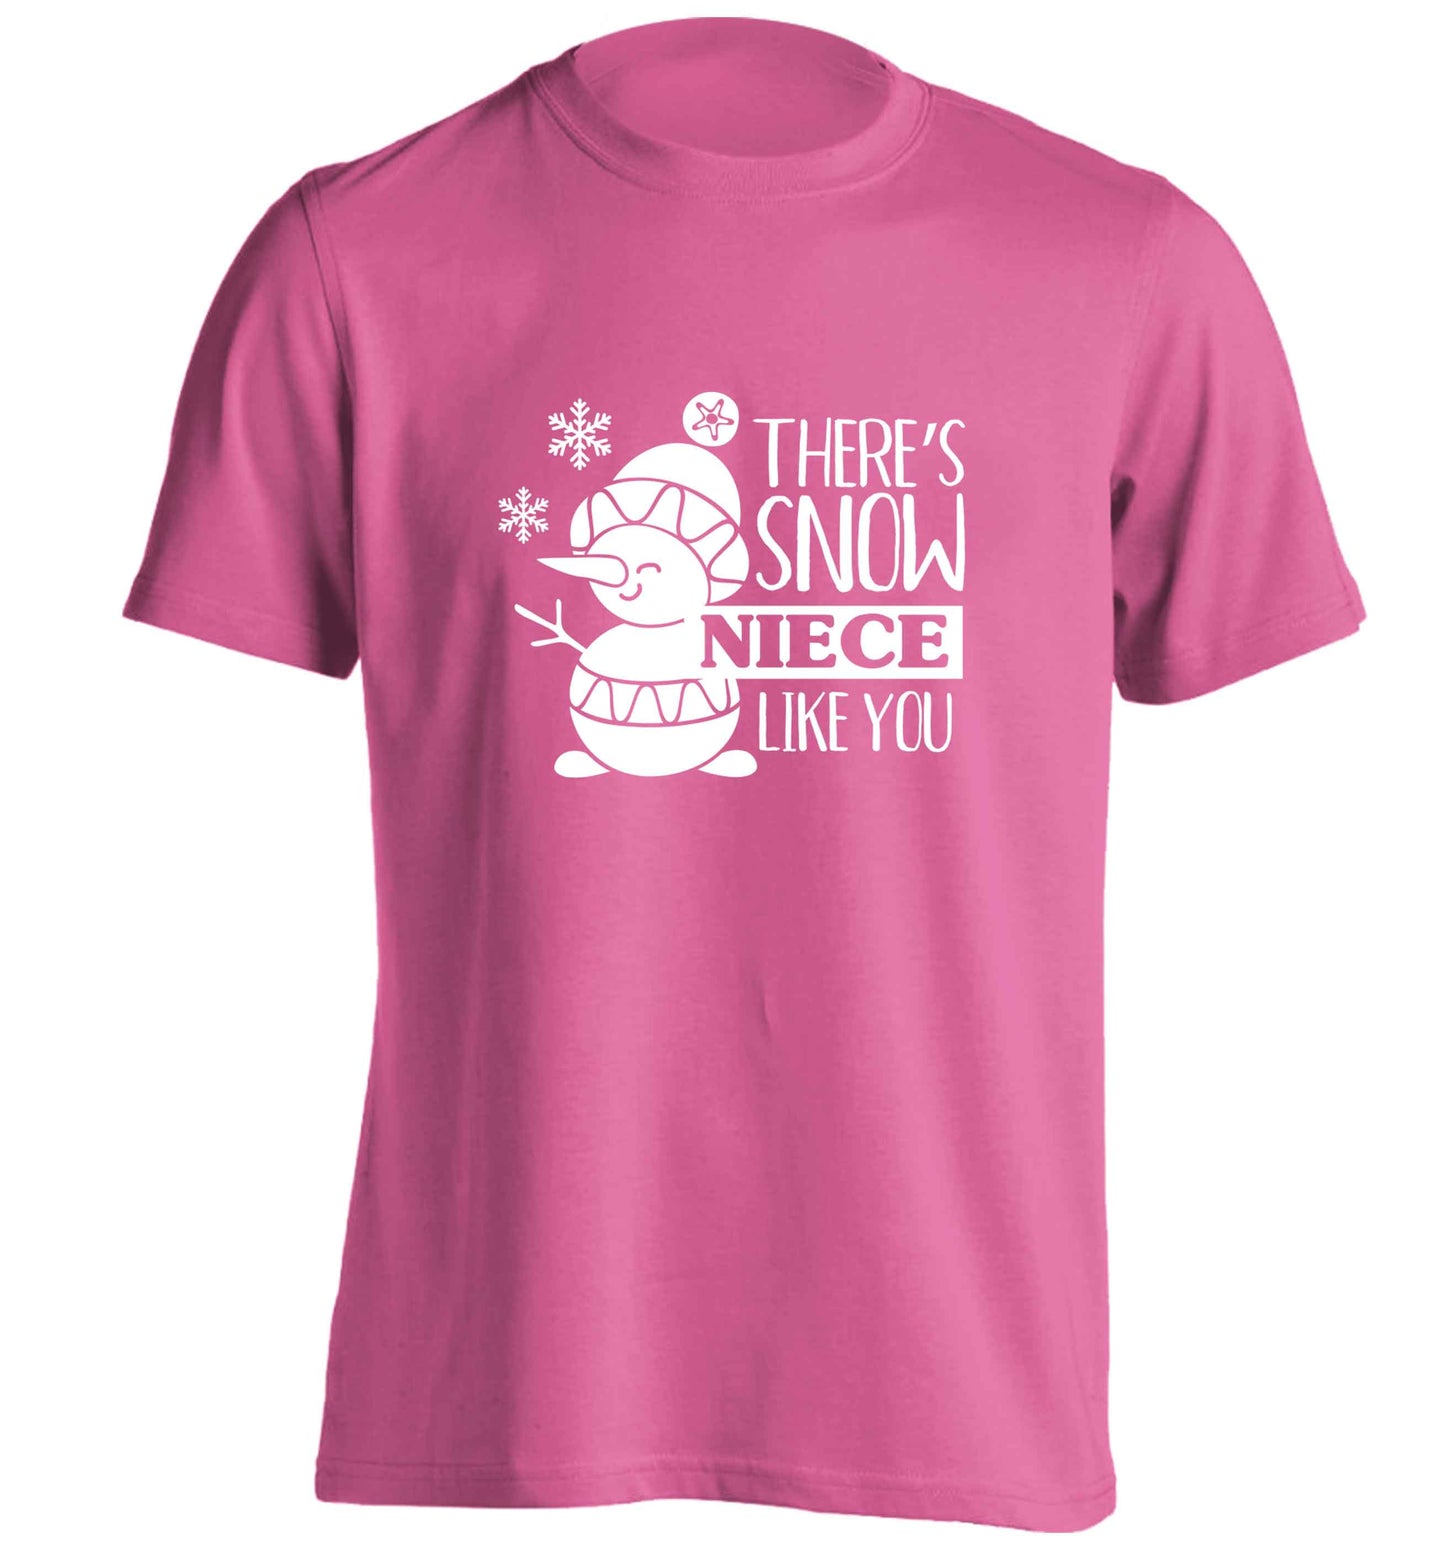 There's snow niece like you adults unisex pink Tshirt 2XL